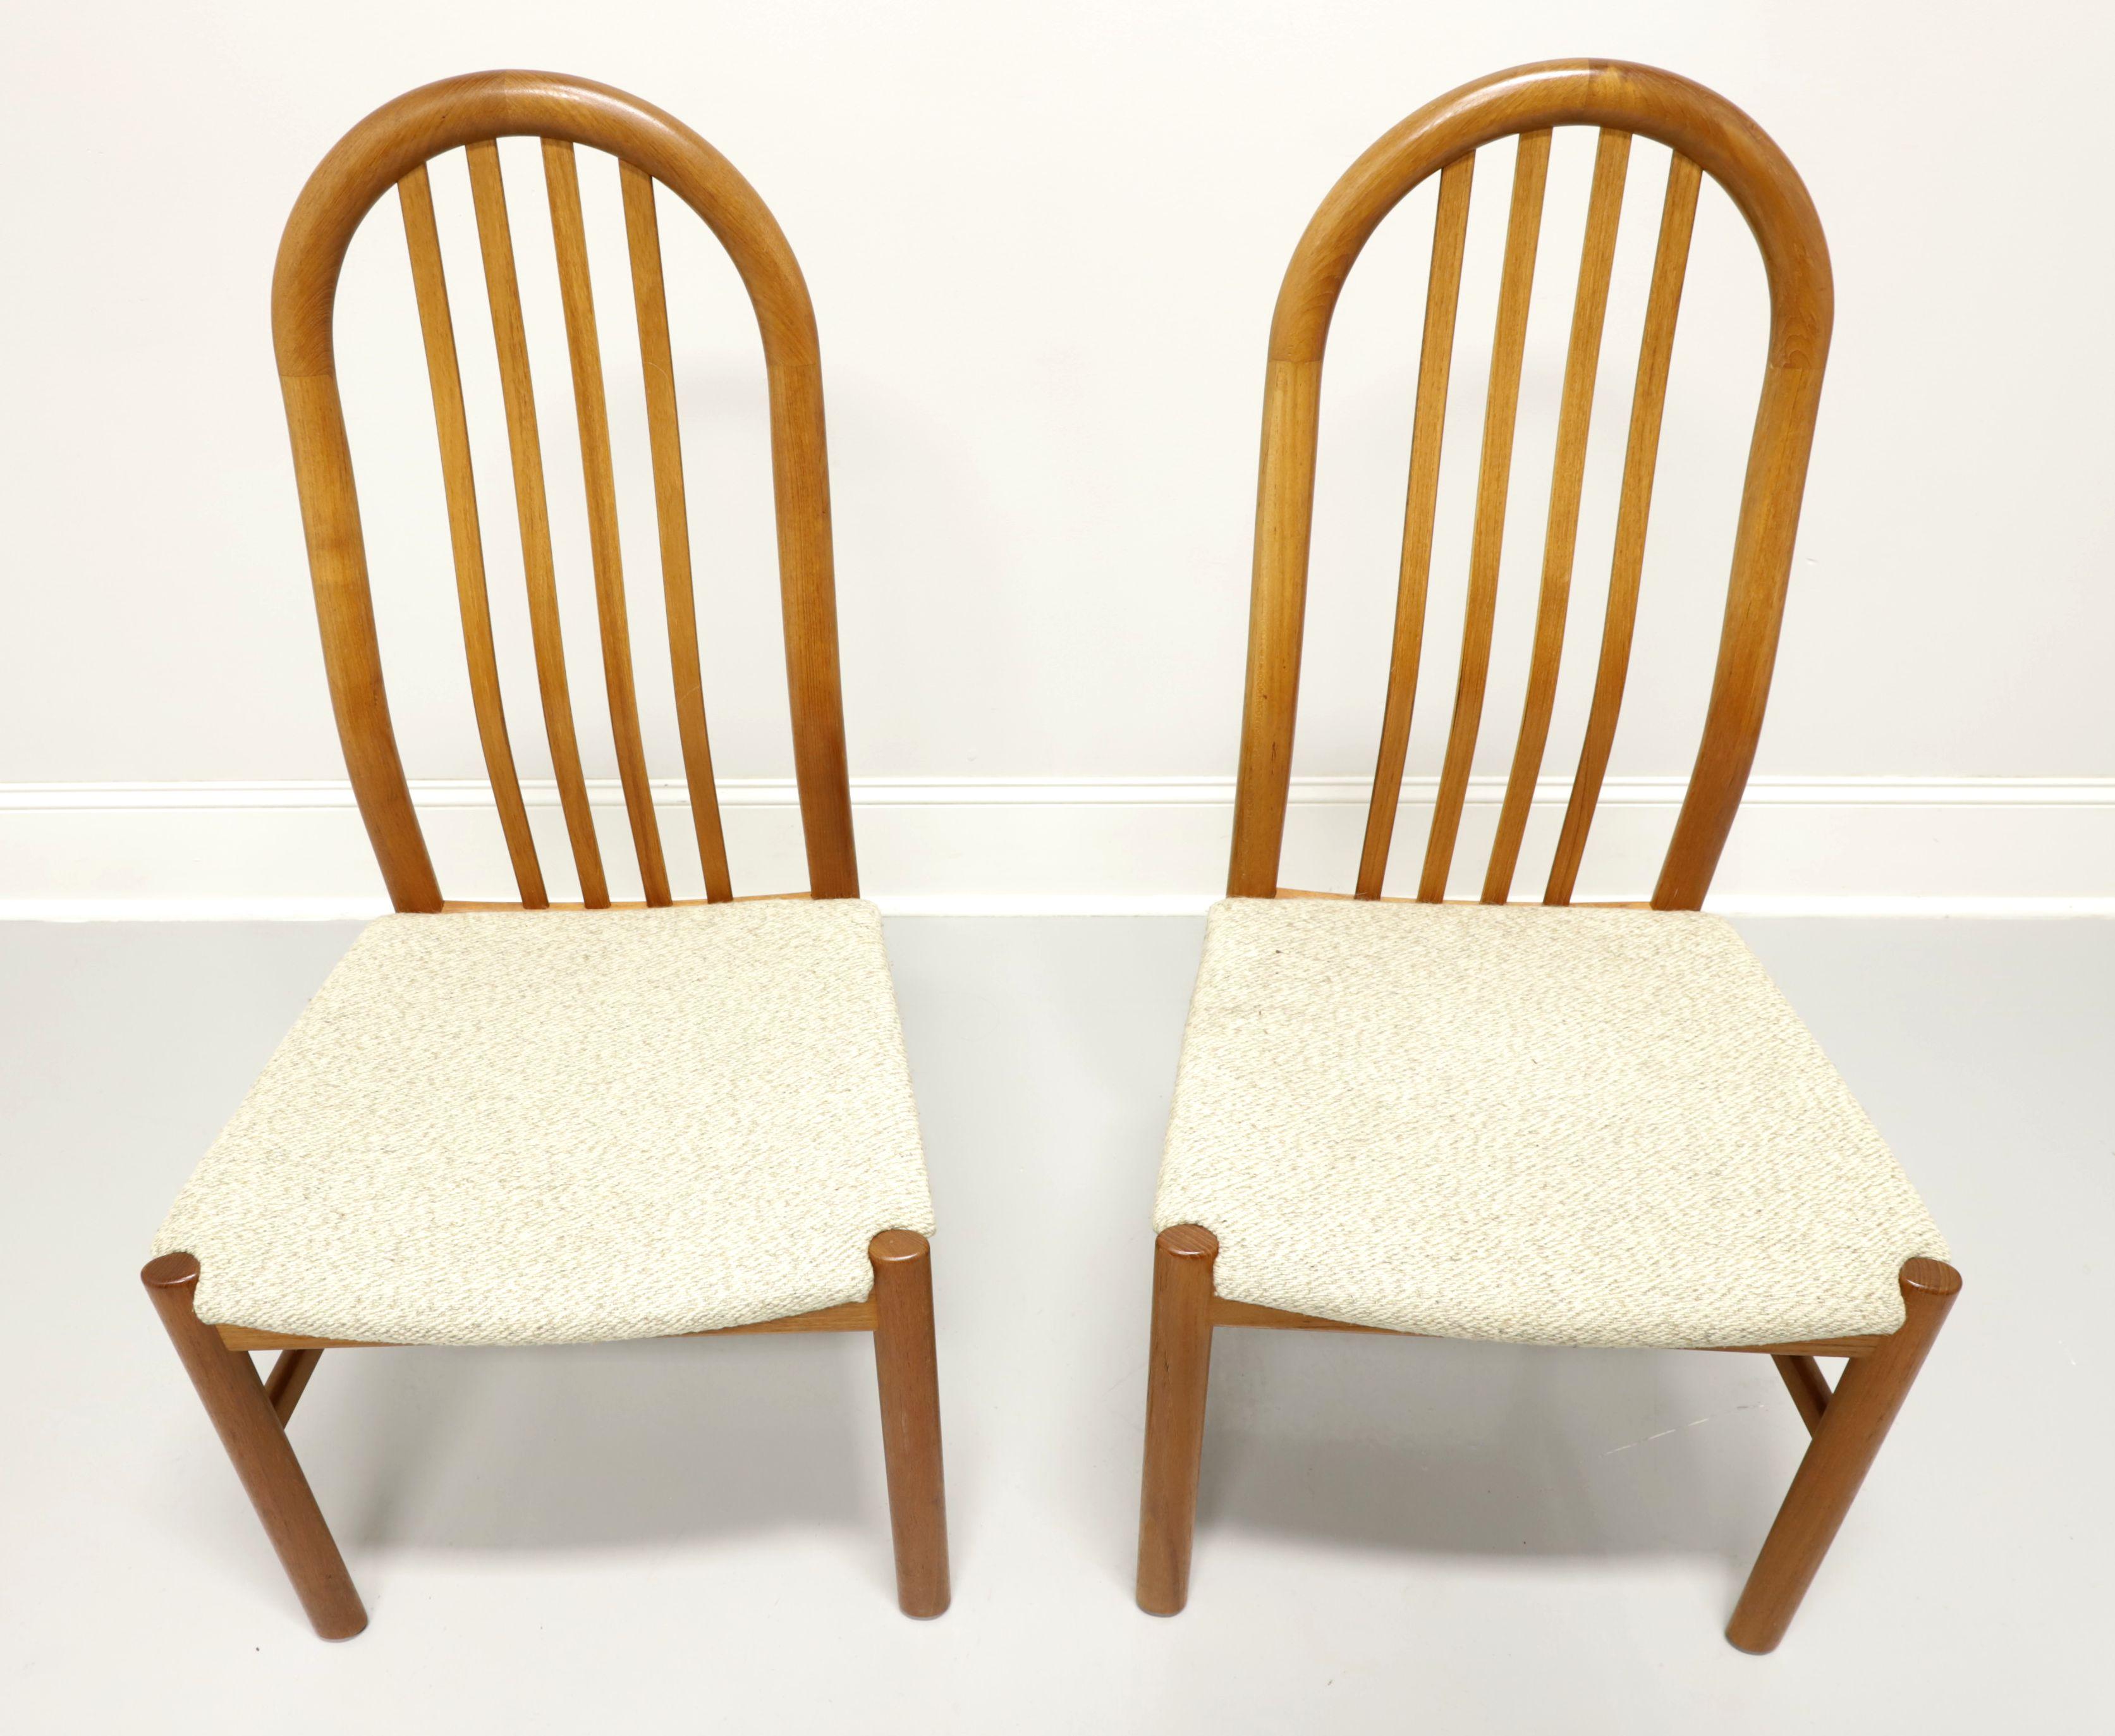 A pair of dining side chairs in the Danish Modern style by Skovby. Teak with arched crestrail, slat back, neutral color tweed like fabric upholstered seat and round straight legs with side stretchers. Made in Denmark, in the the mid-20th